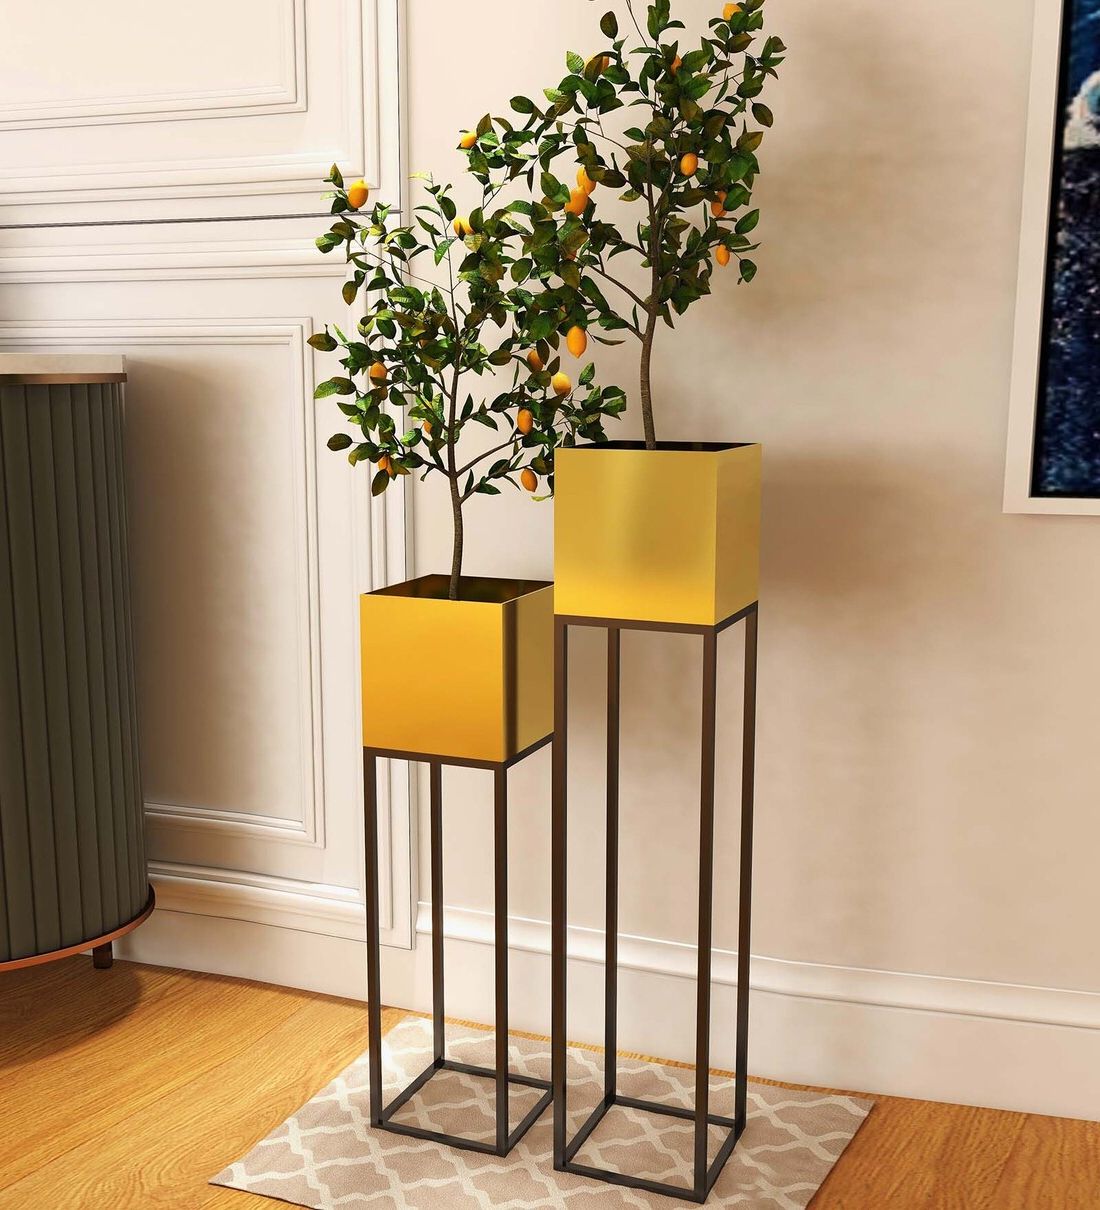 Buy Black & Gold Metal Rectangular Planter Stand, Set Of 2havanto  Online – Metal Planter Stands – Pots & Planters – Home Decor – Pepperfry  Product Inside Most Recently Released Rectangular Plant Stands (View 10 of 10)